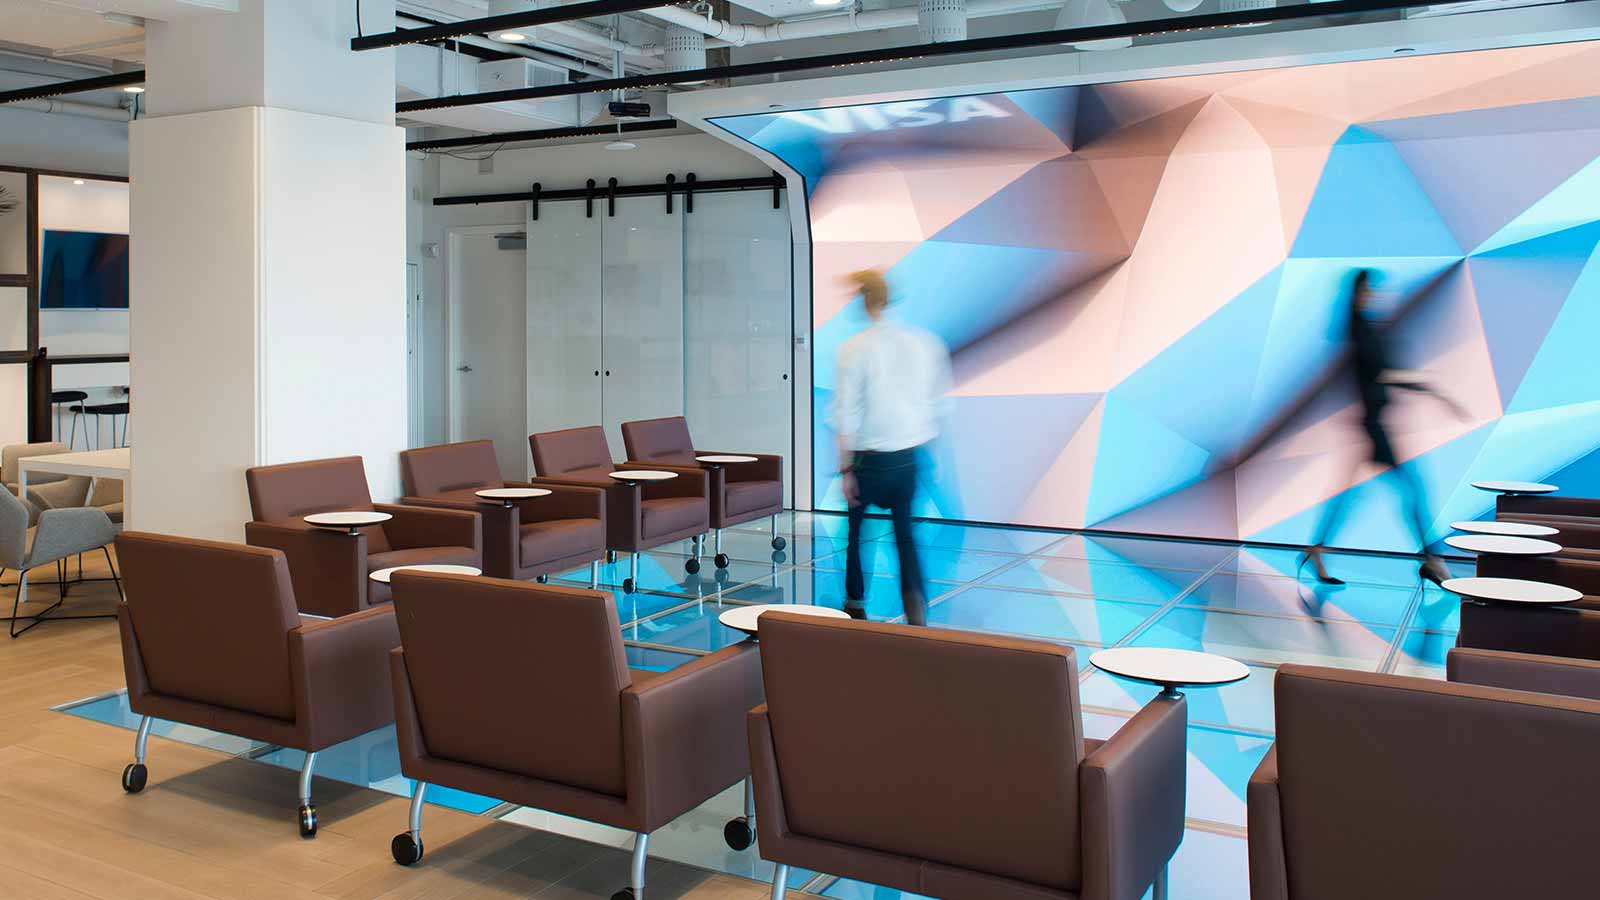 A stylish shot features a meeting area in the Visa Design studio.